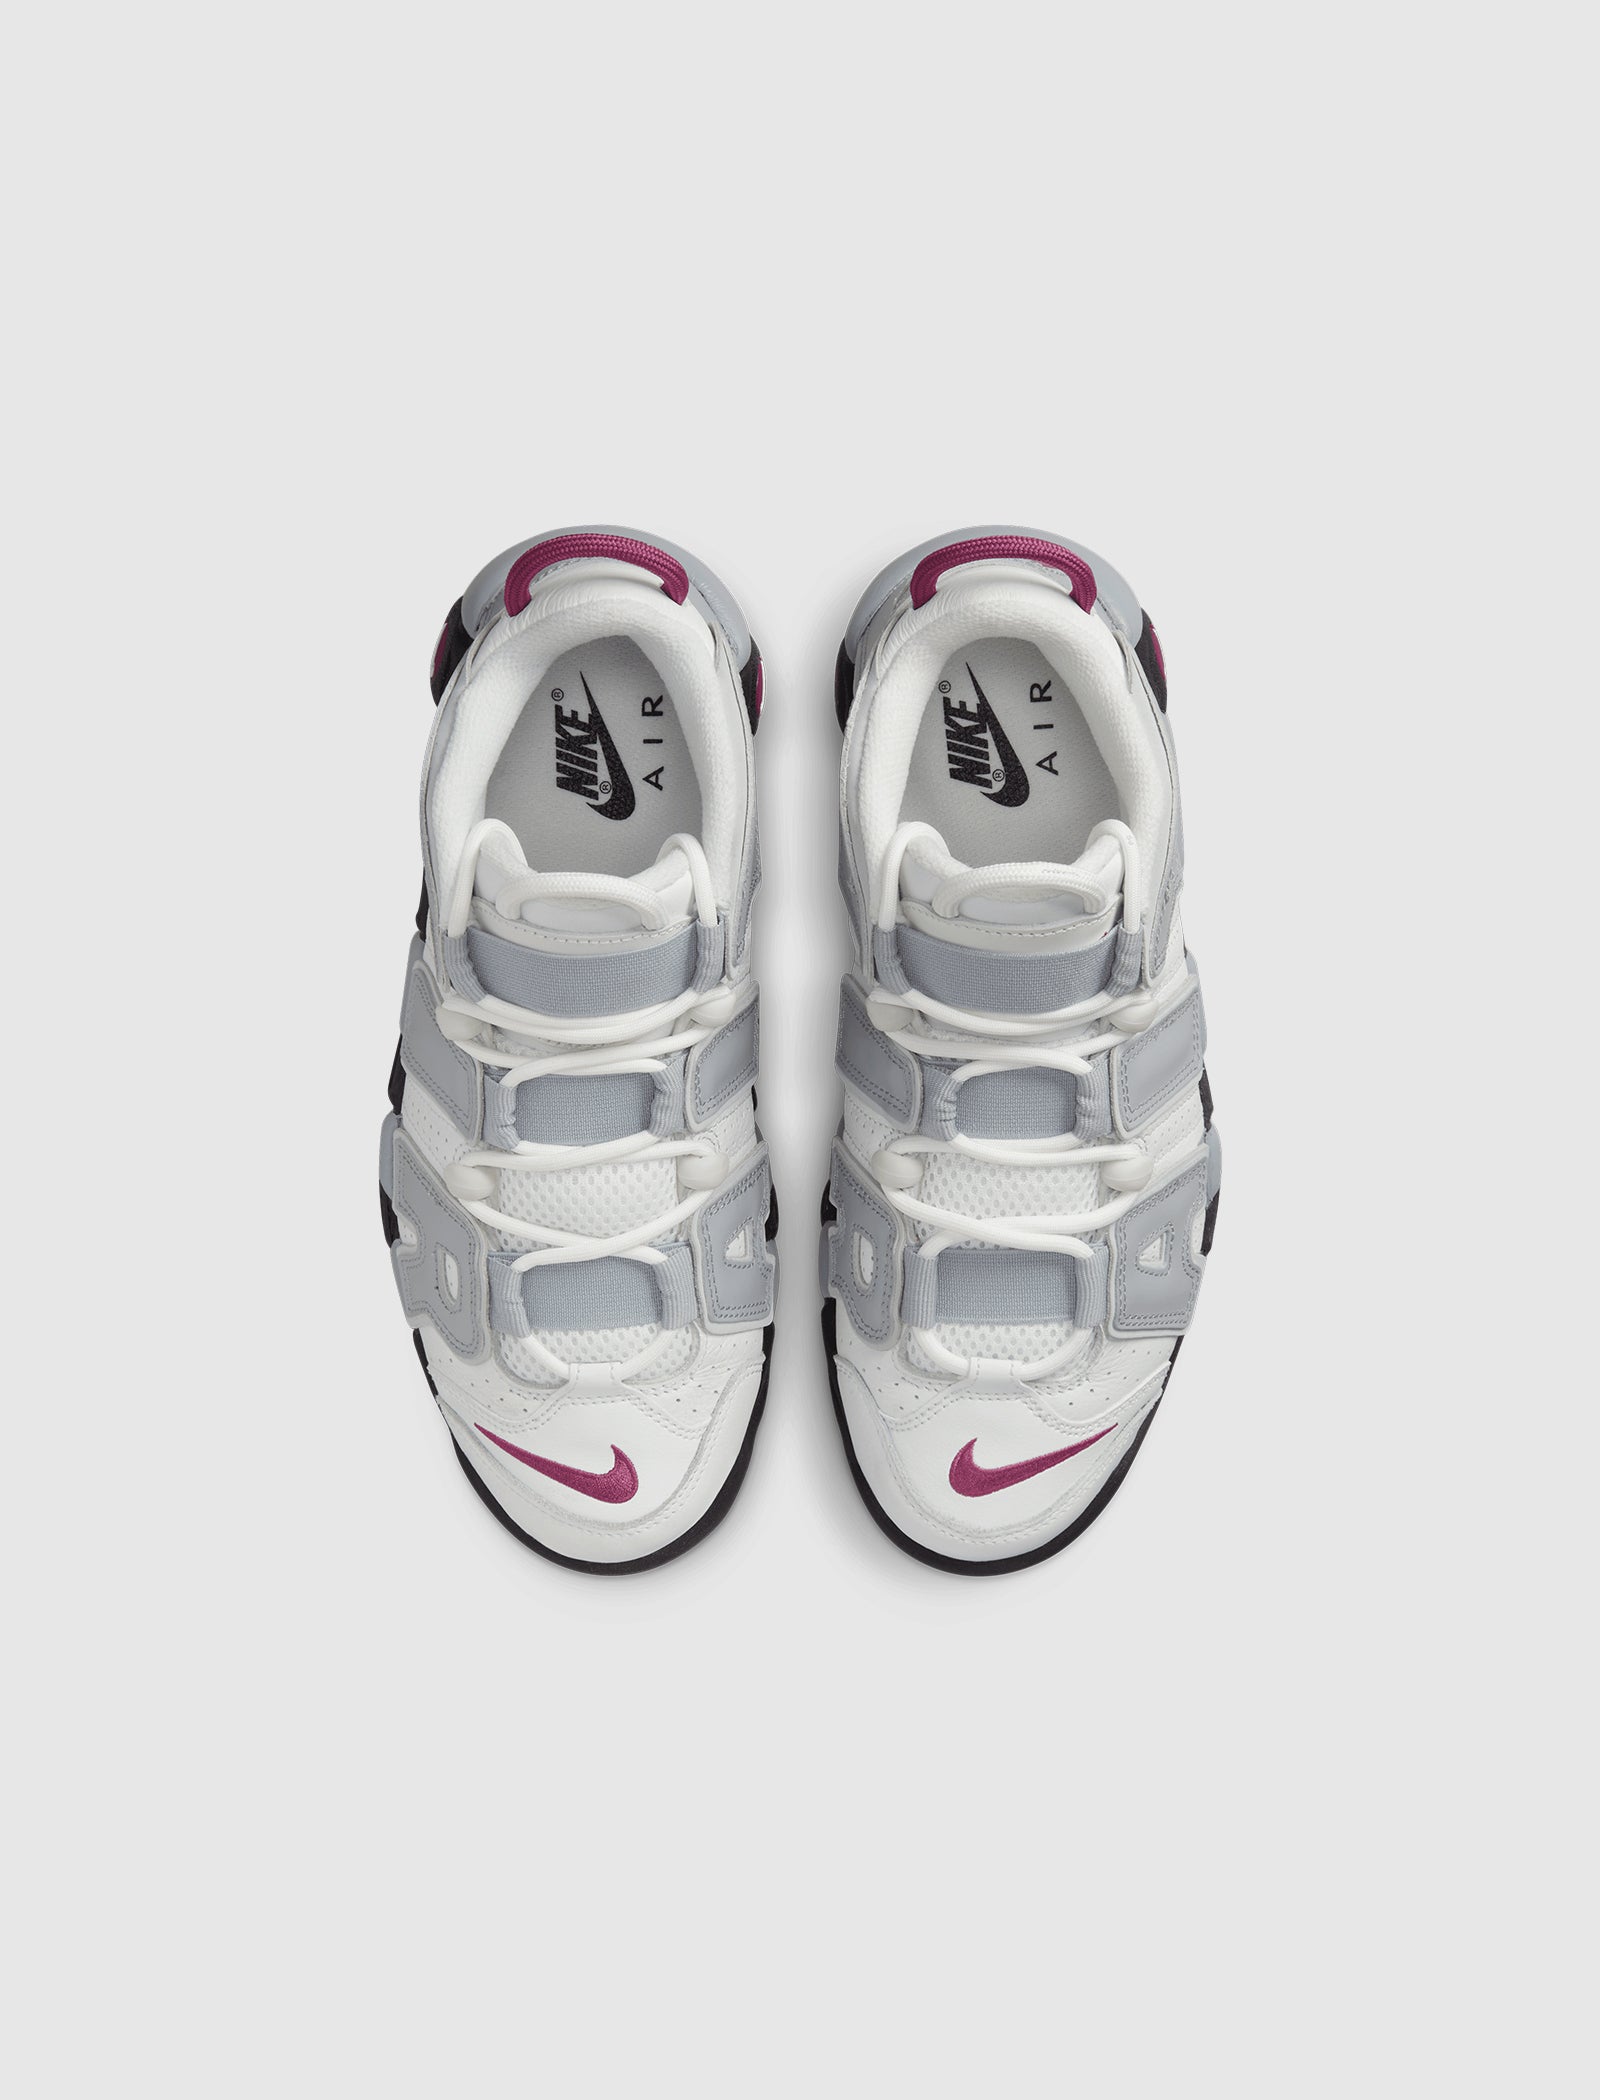 WOMEN'S NIKE AIR MORE UPTEMPO "MULBERRY"